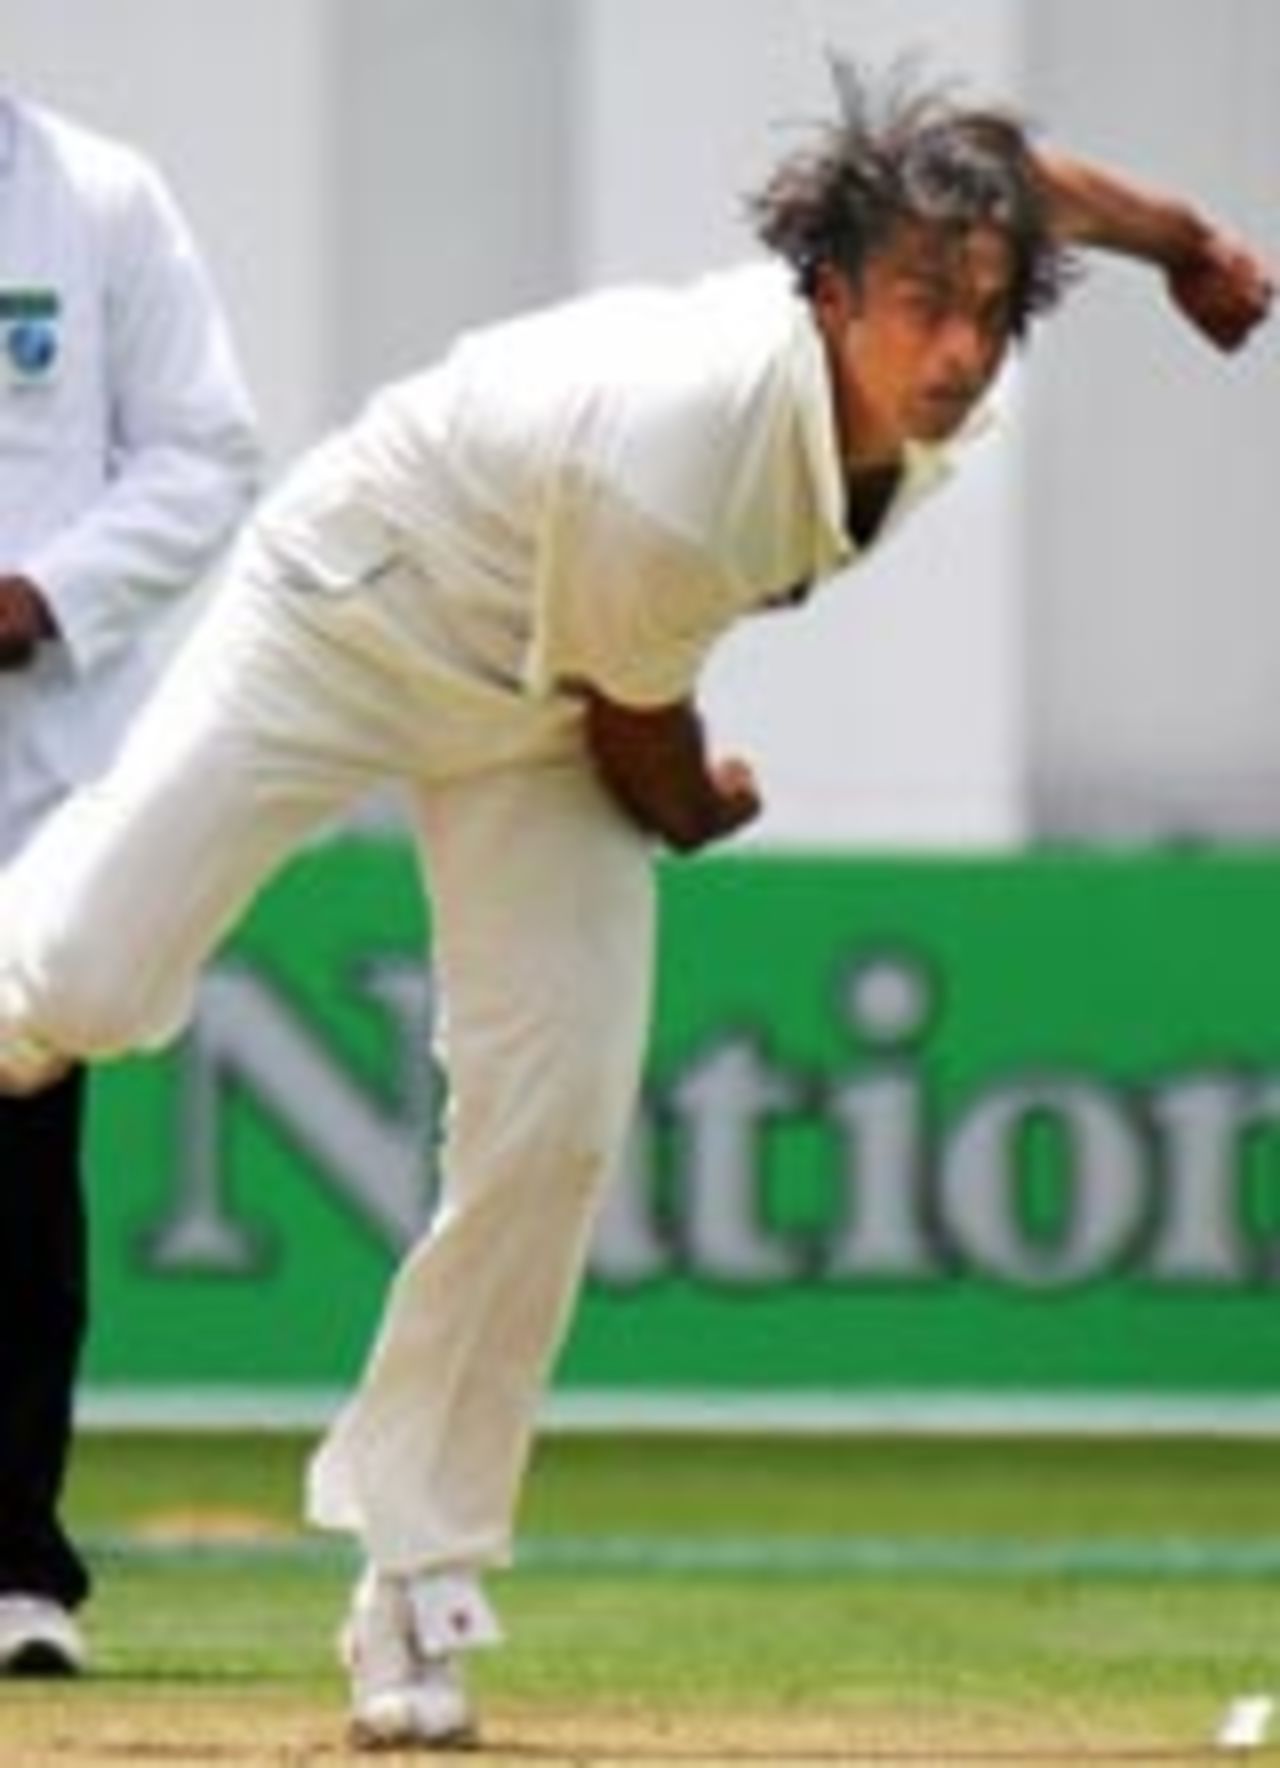 Shoaib Akhtar unleashes another quick delivery, New Zealand v Pakistan, 2nd Test, Wellington, 1st day, December 26, 2003